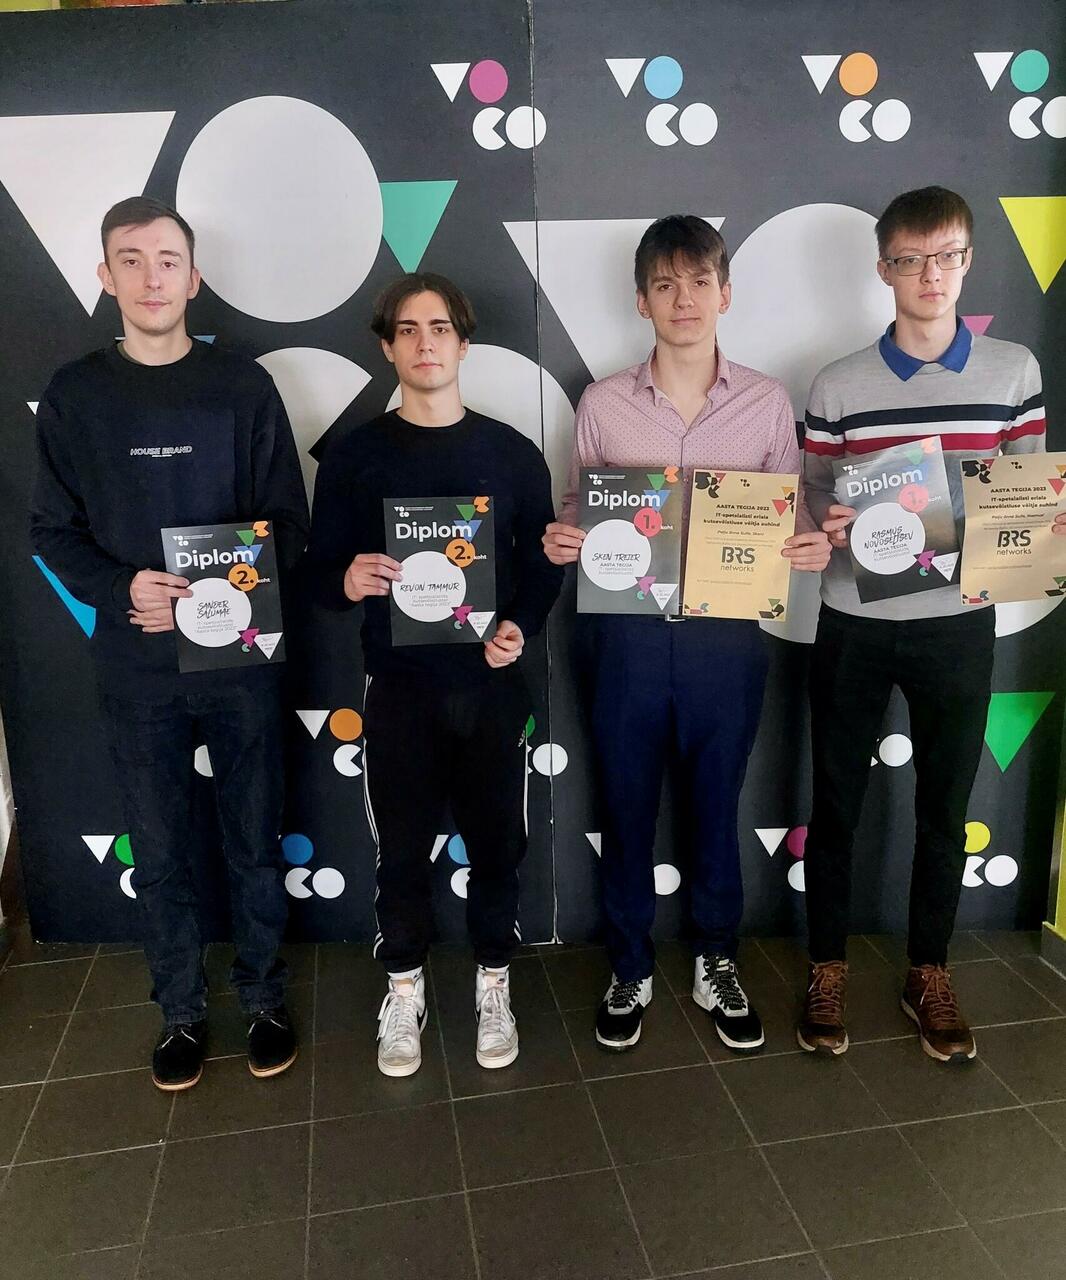 Winners of the IT systems specialist vocational competition